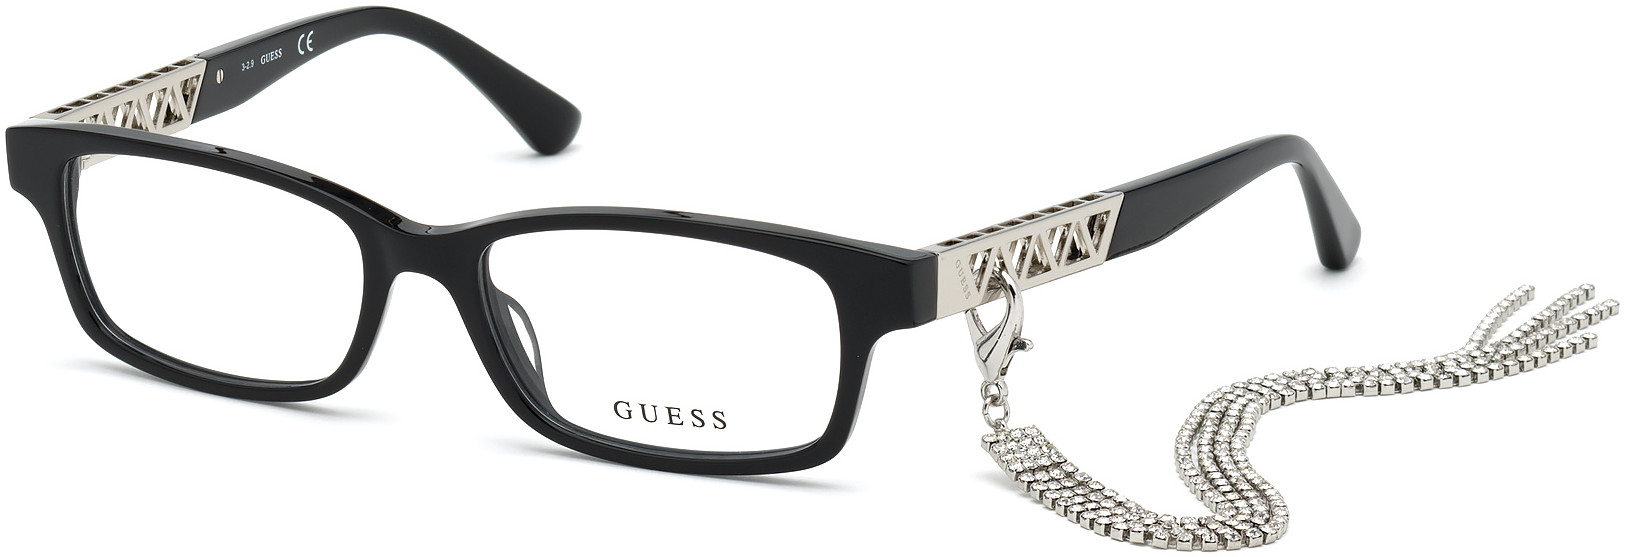 GUESS 2785 001